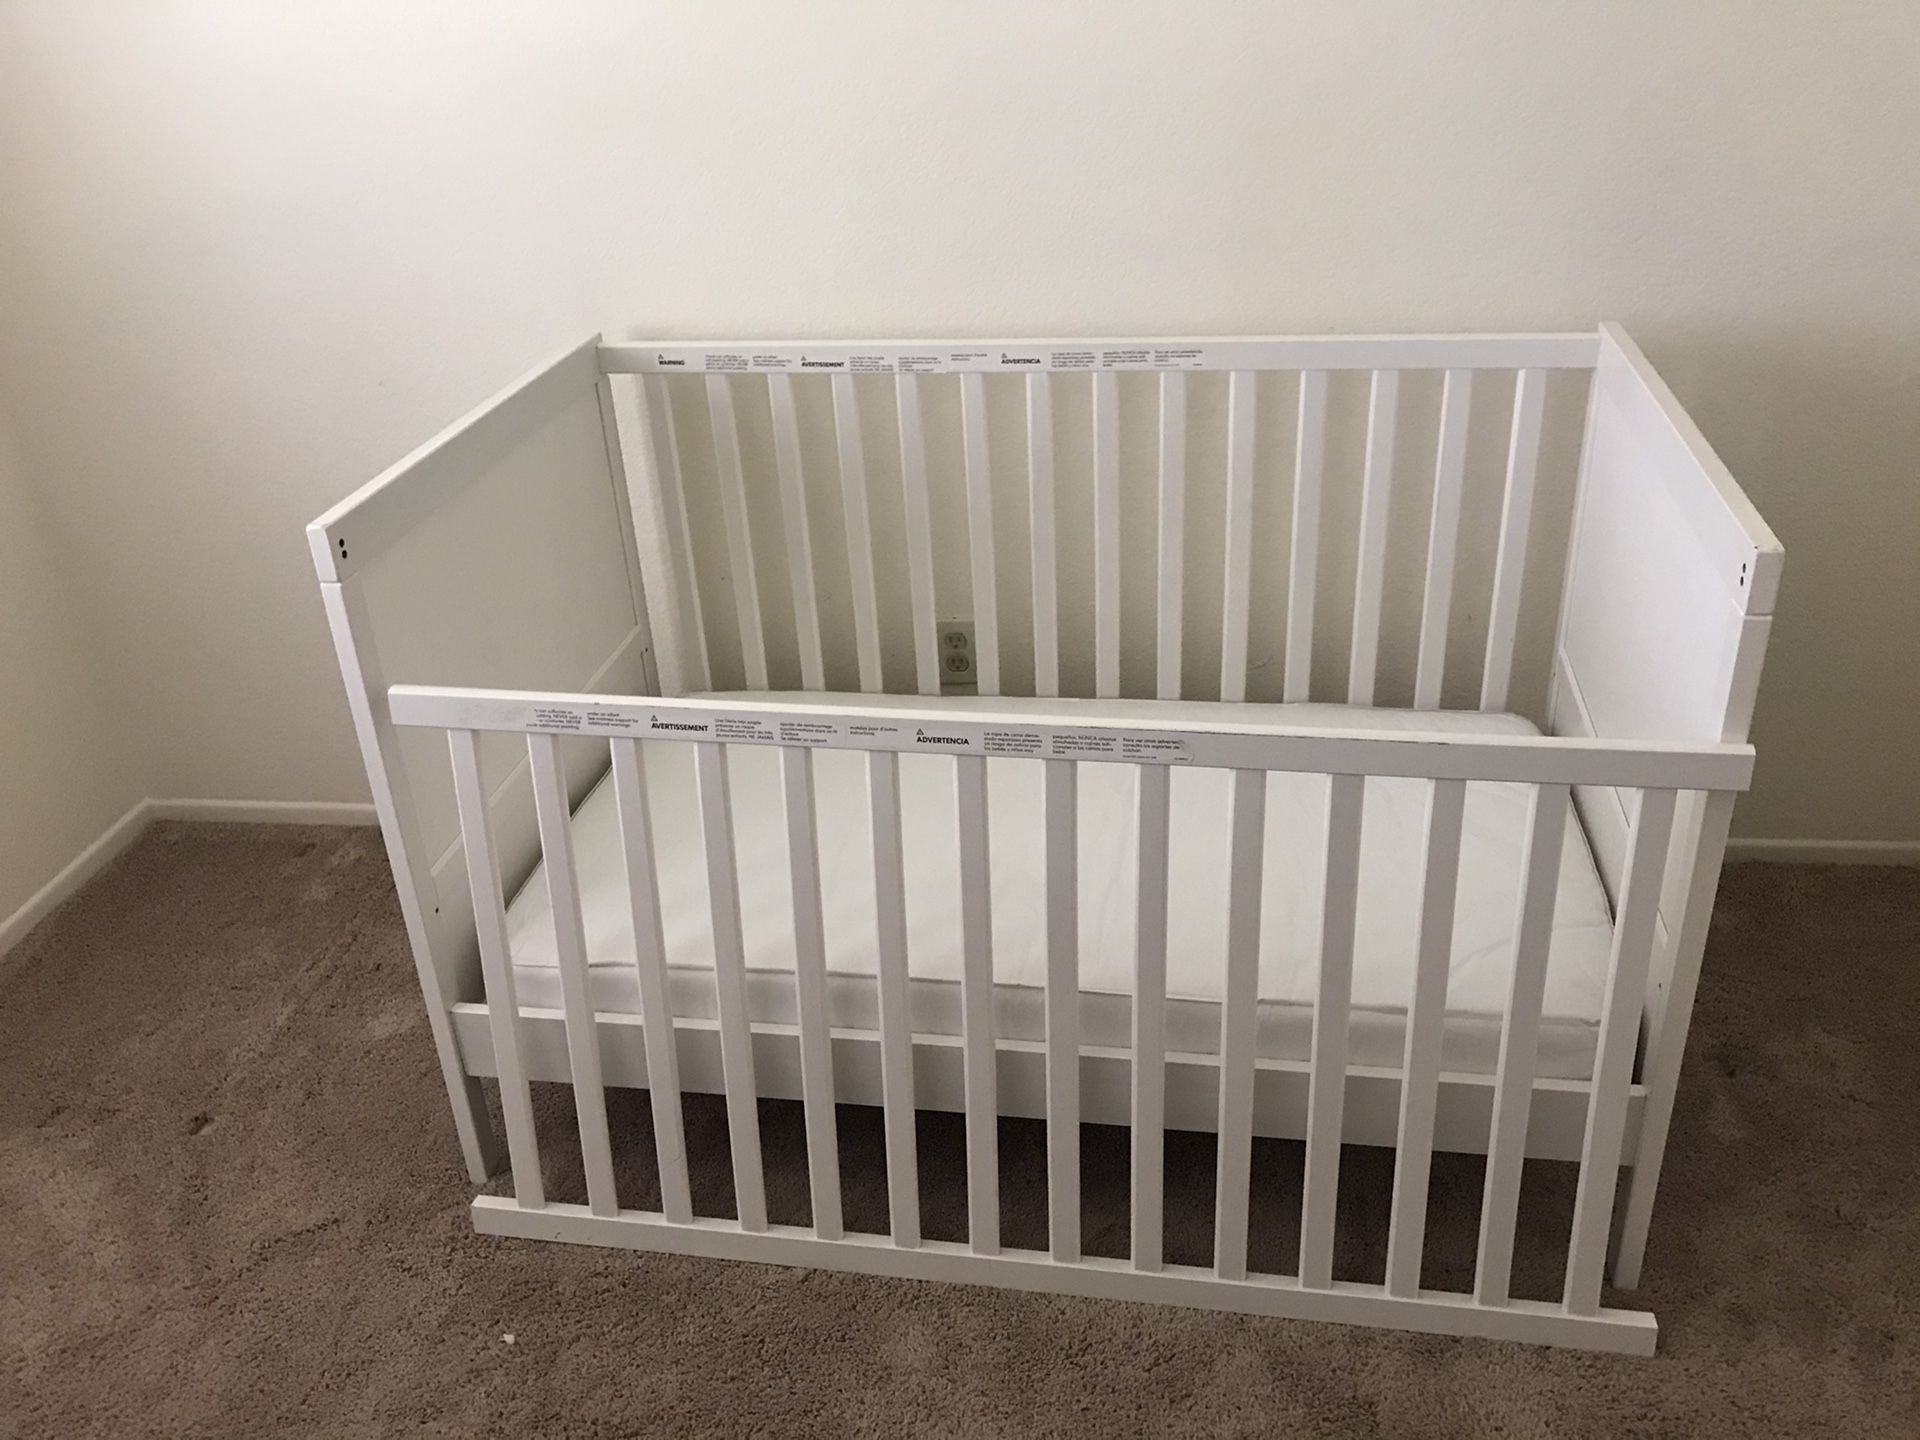 IKEA crib and other baby items